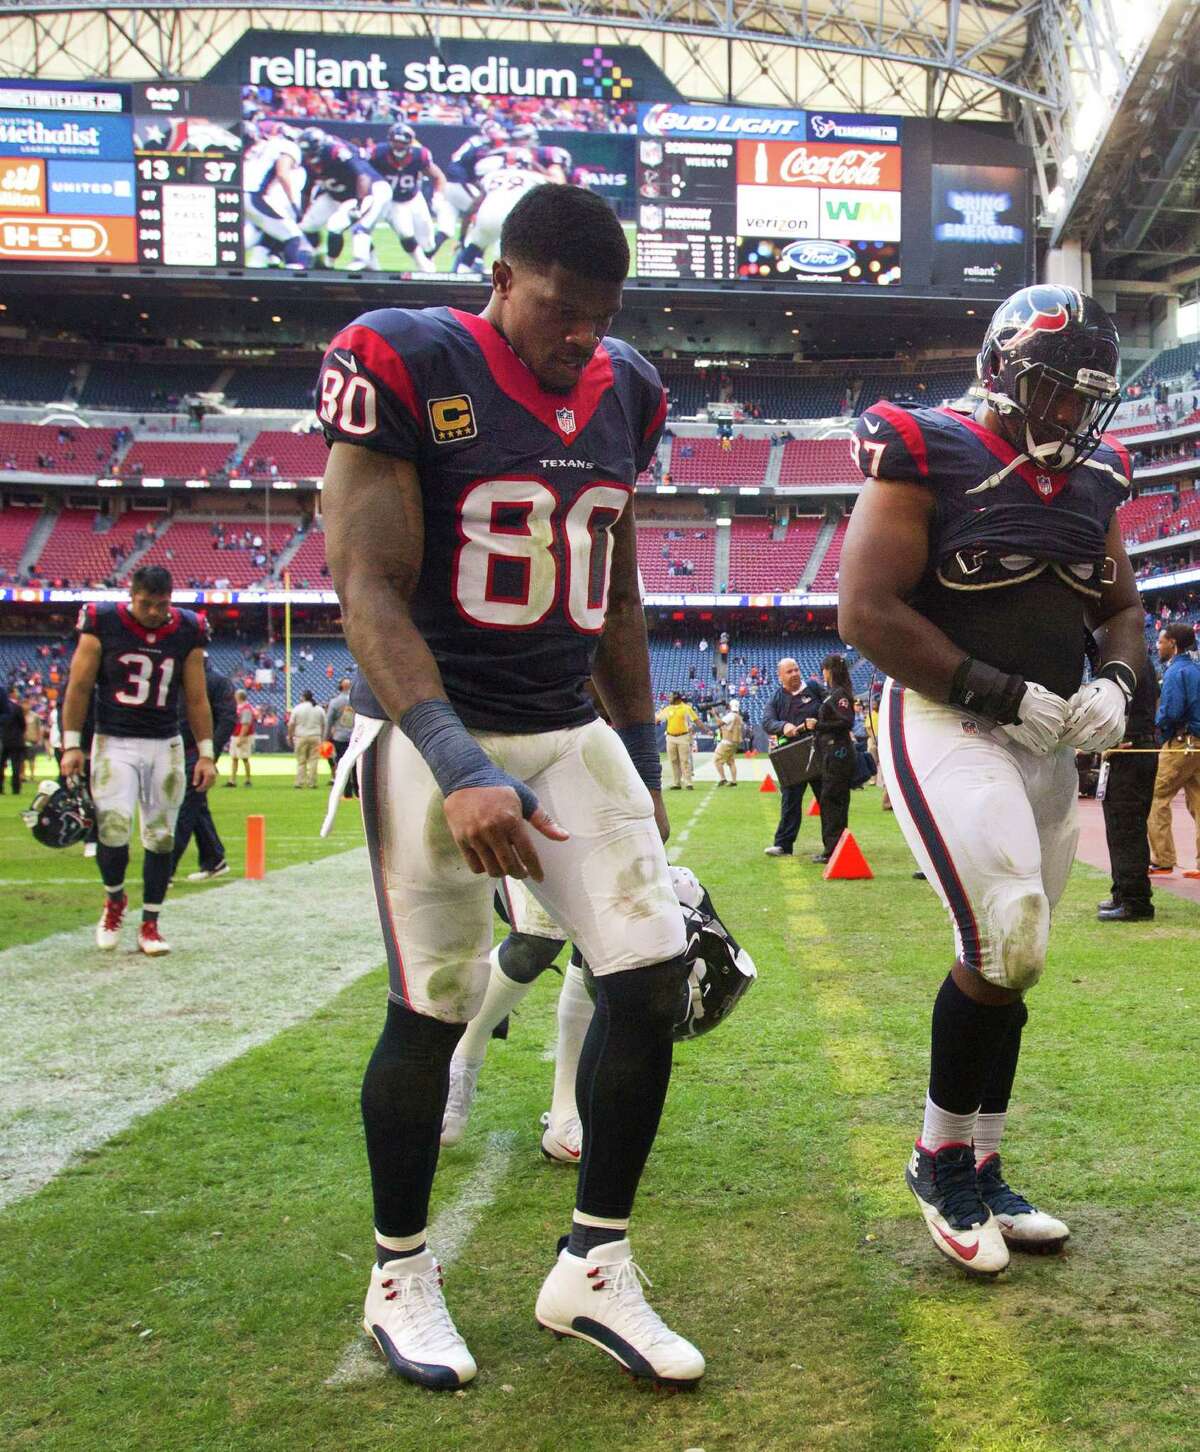 Texans wide receiver Andre Johnson would lose $588,235 a week if he chooses to sit out this coming season.